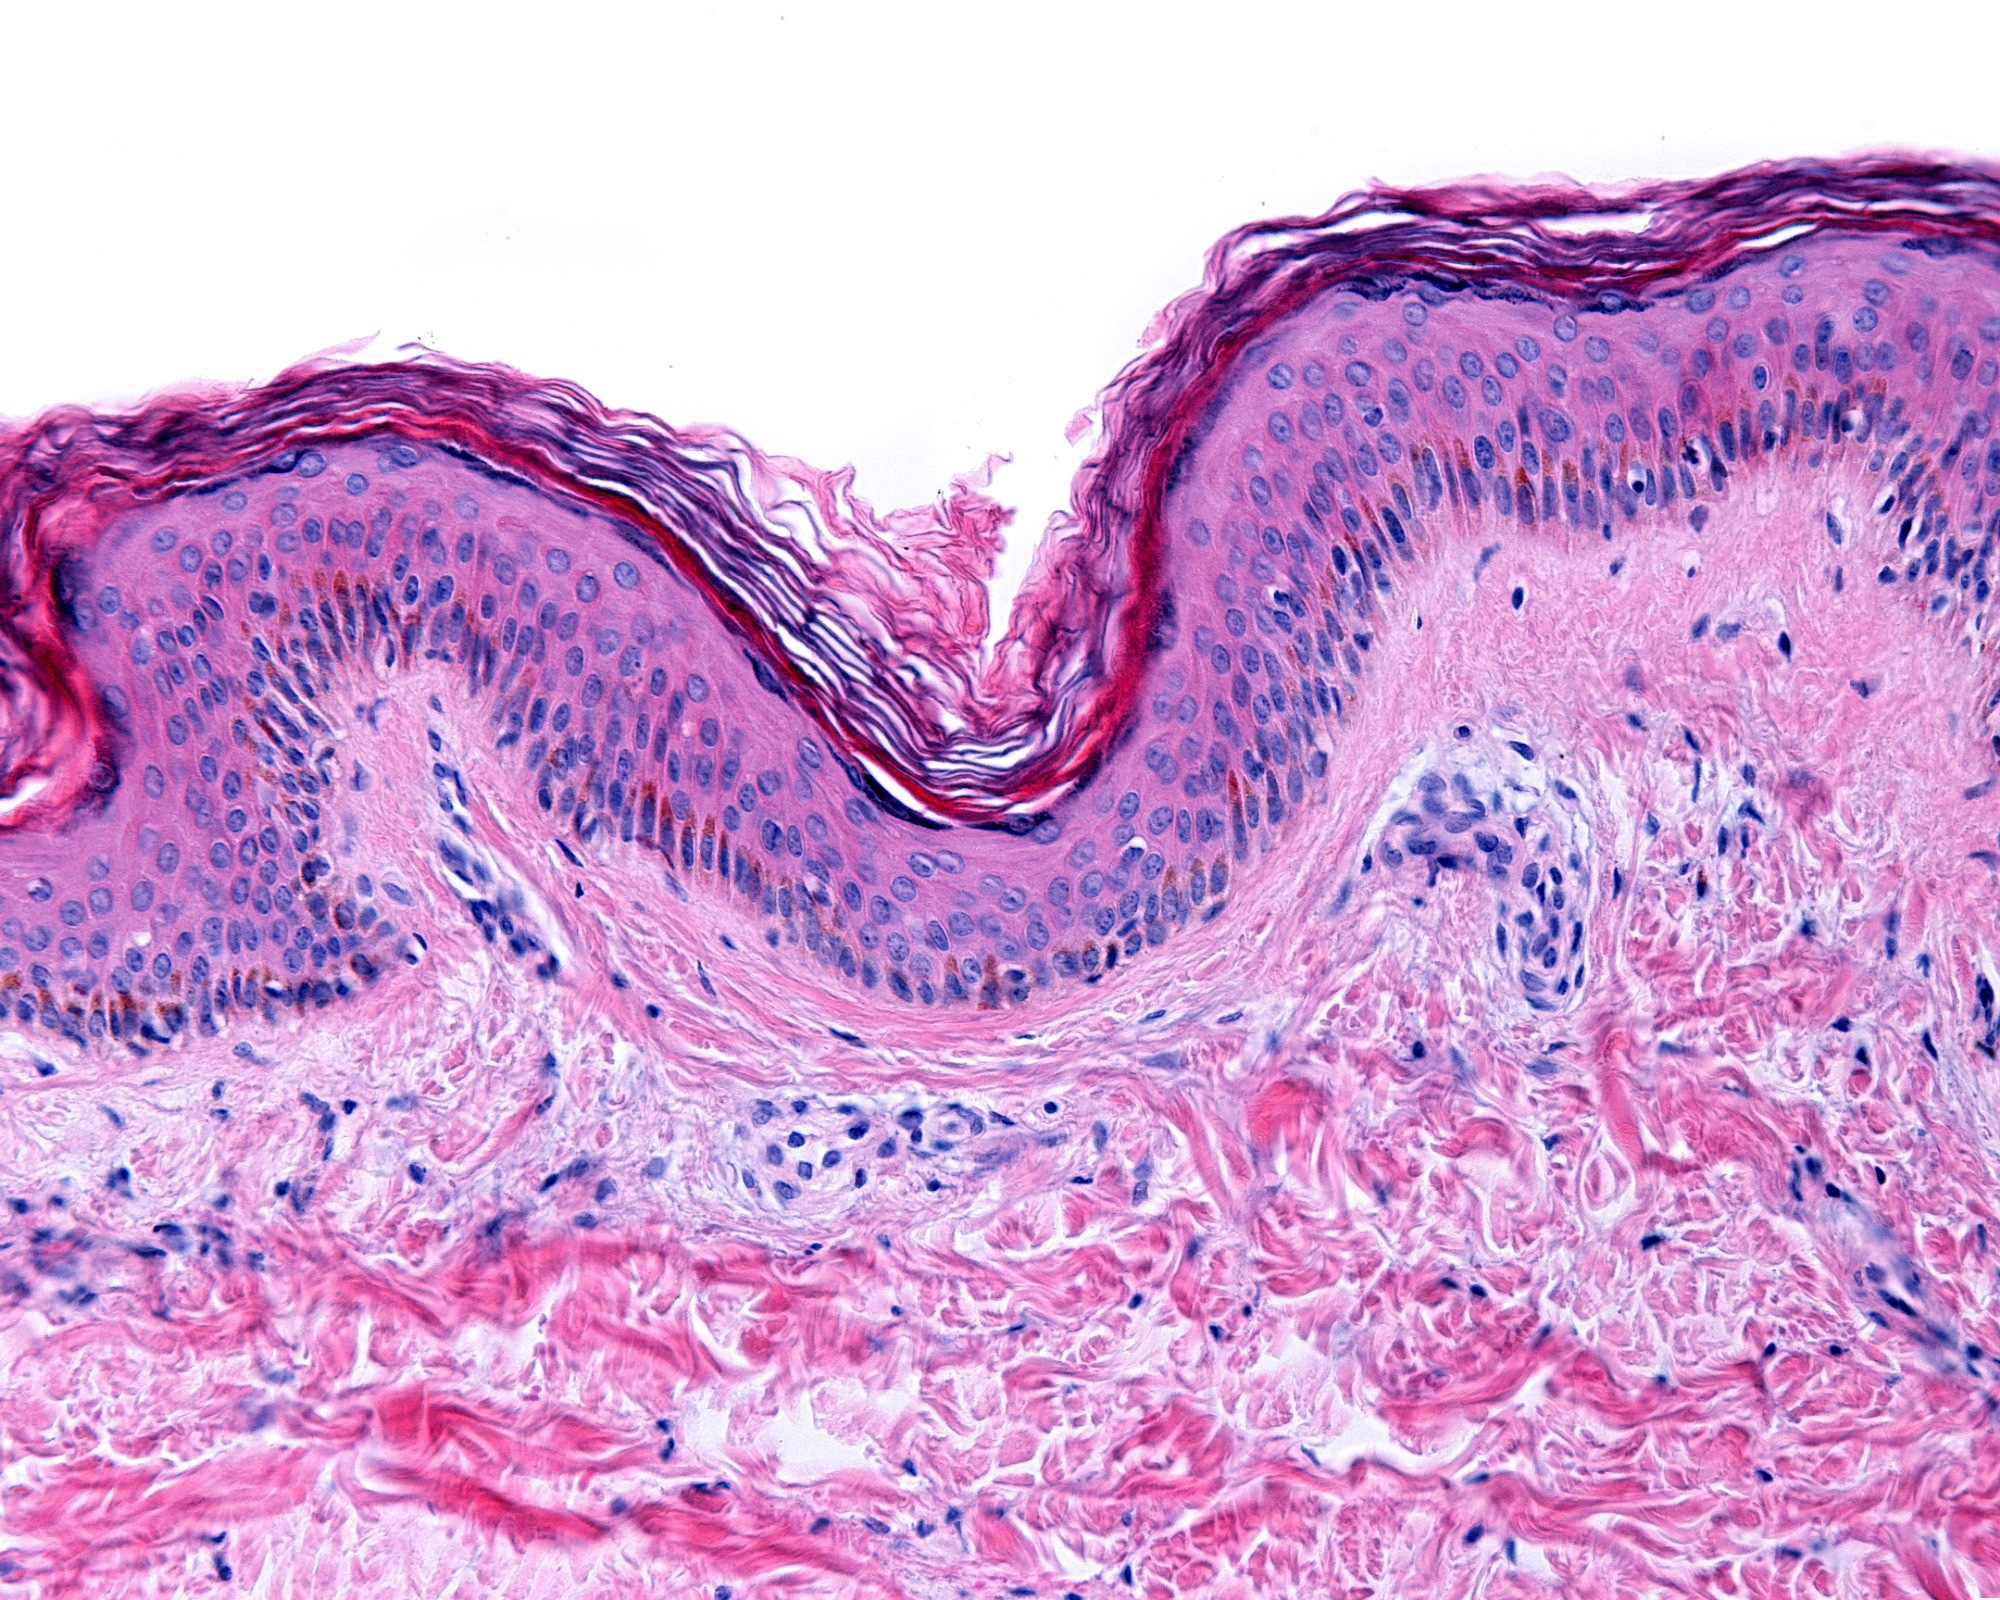 Thin skin showing the epidermis with its different strata, resting on the dermis. Image Credit: Jose Luis Calvo / Shutterstock.com